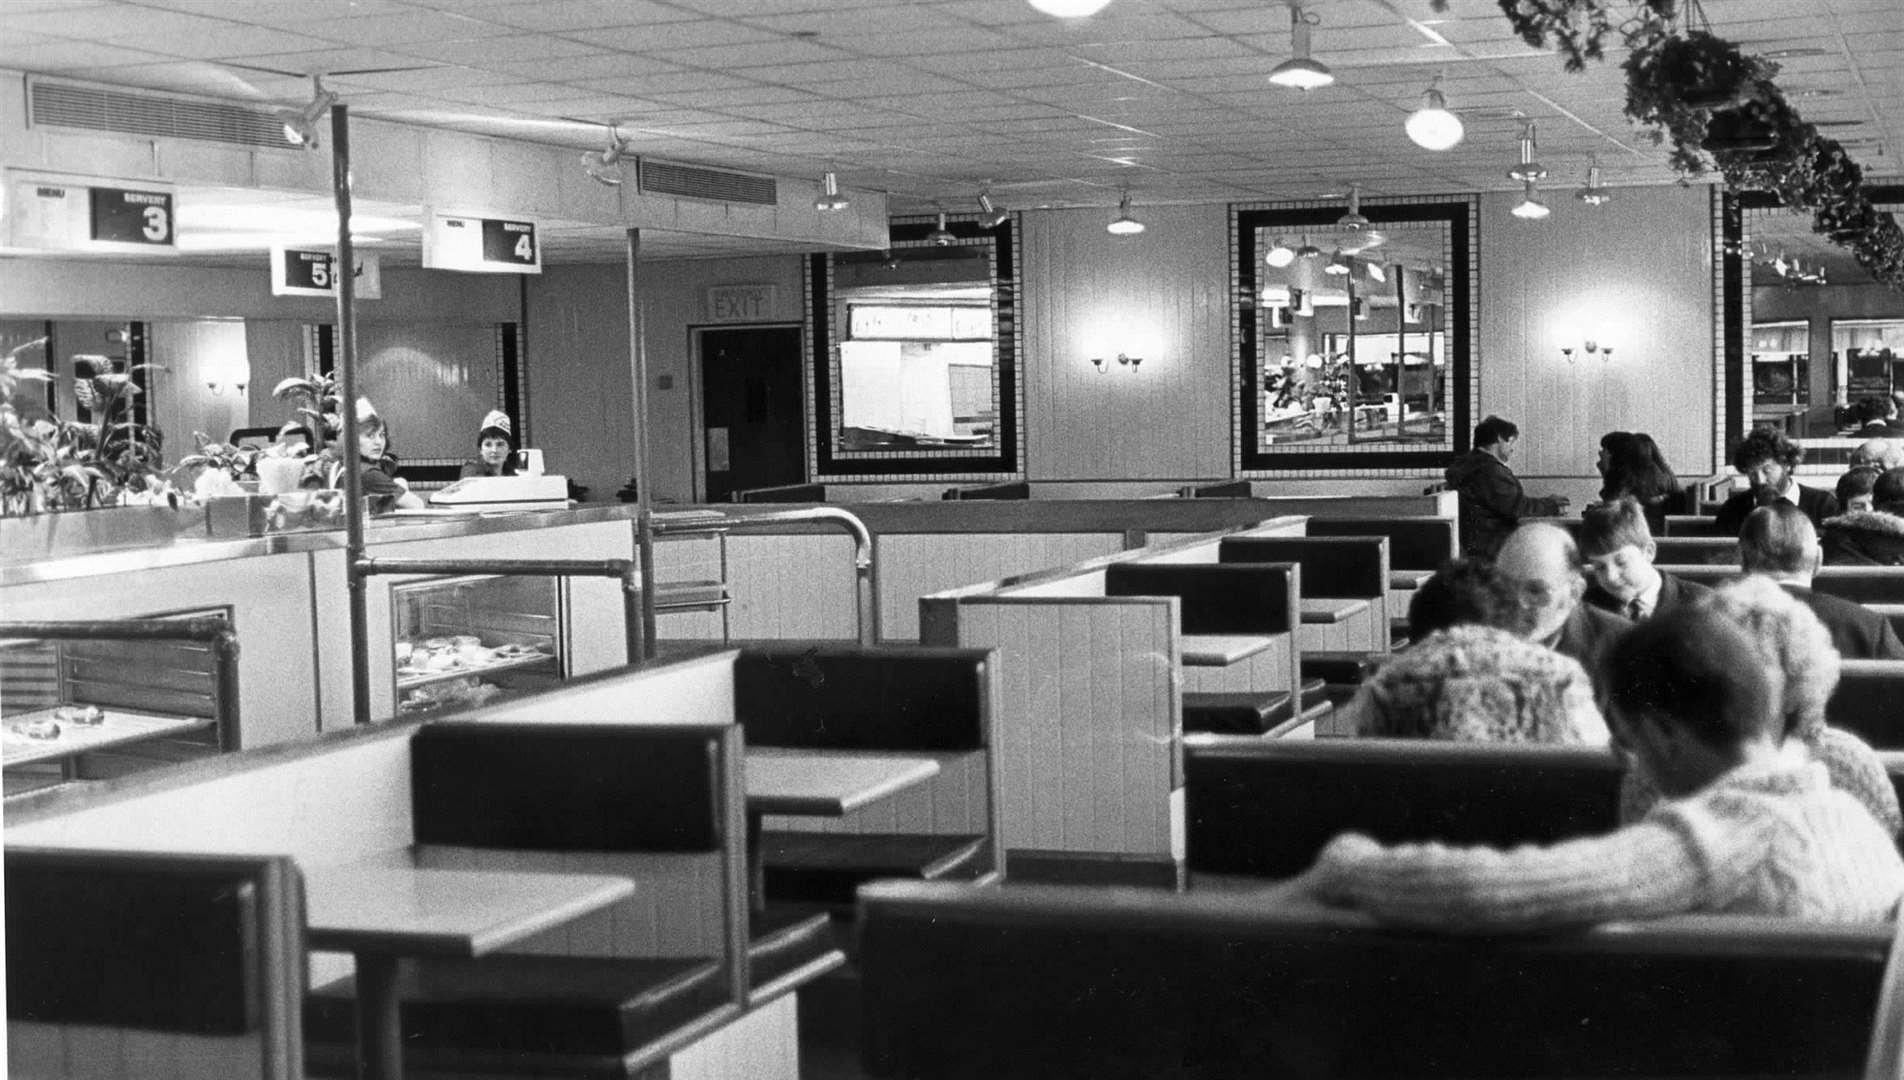 Inside the M2 Cafeteria at Farthing Corner in March, 1981